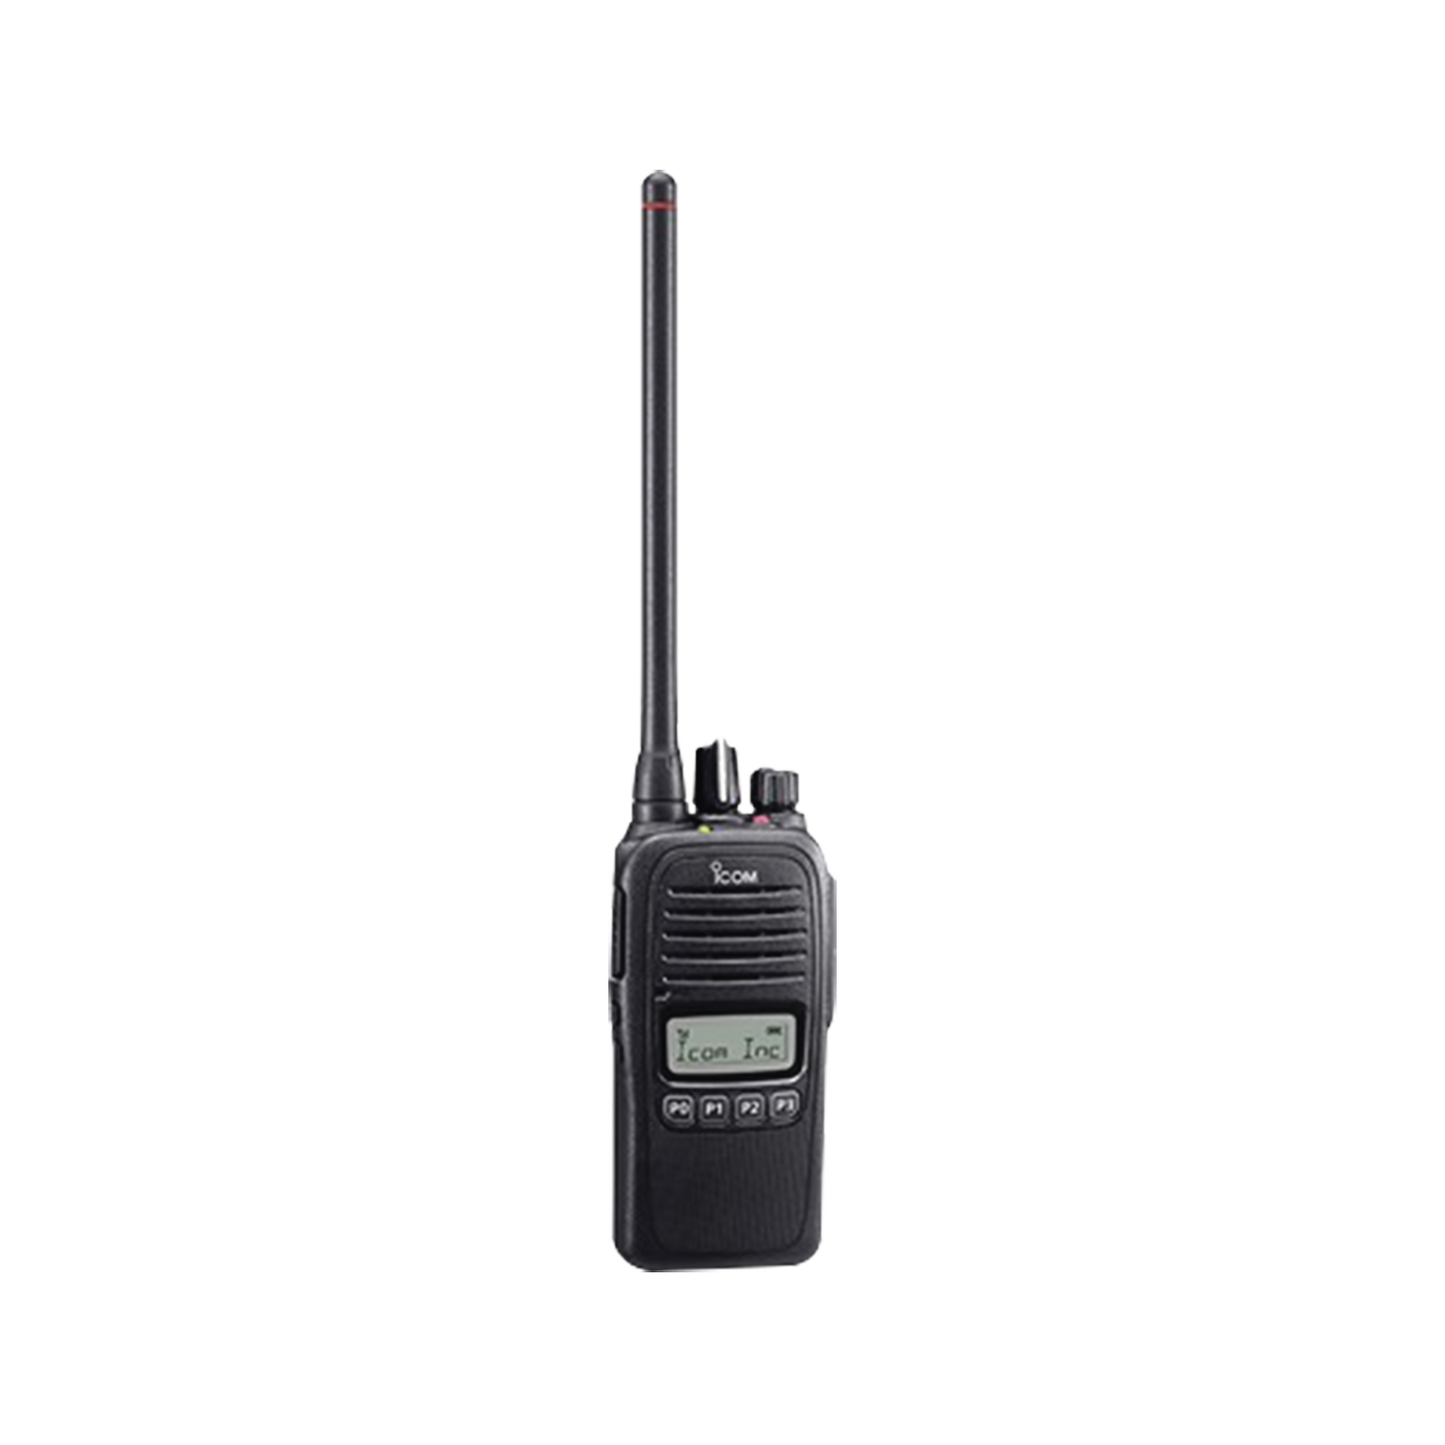 Portable Analog Radio, Frequency Range 136-174 MHz (N) 12.5kHz, 5 W, 128 Channels, IP67 Submersible, 136-174 MHz, Includes Rapid Charger BC-213